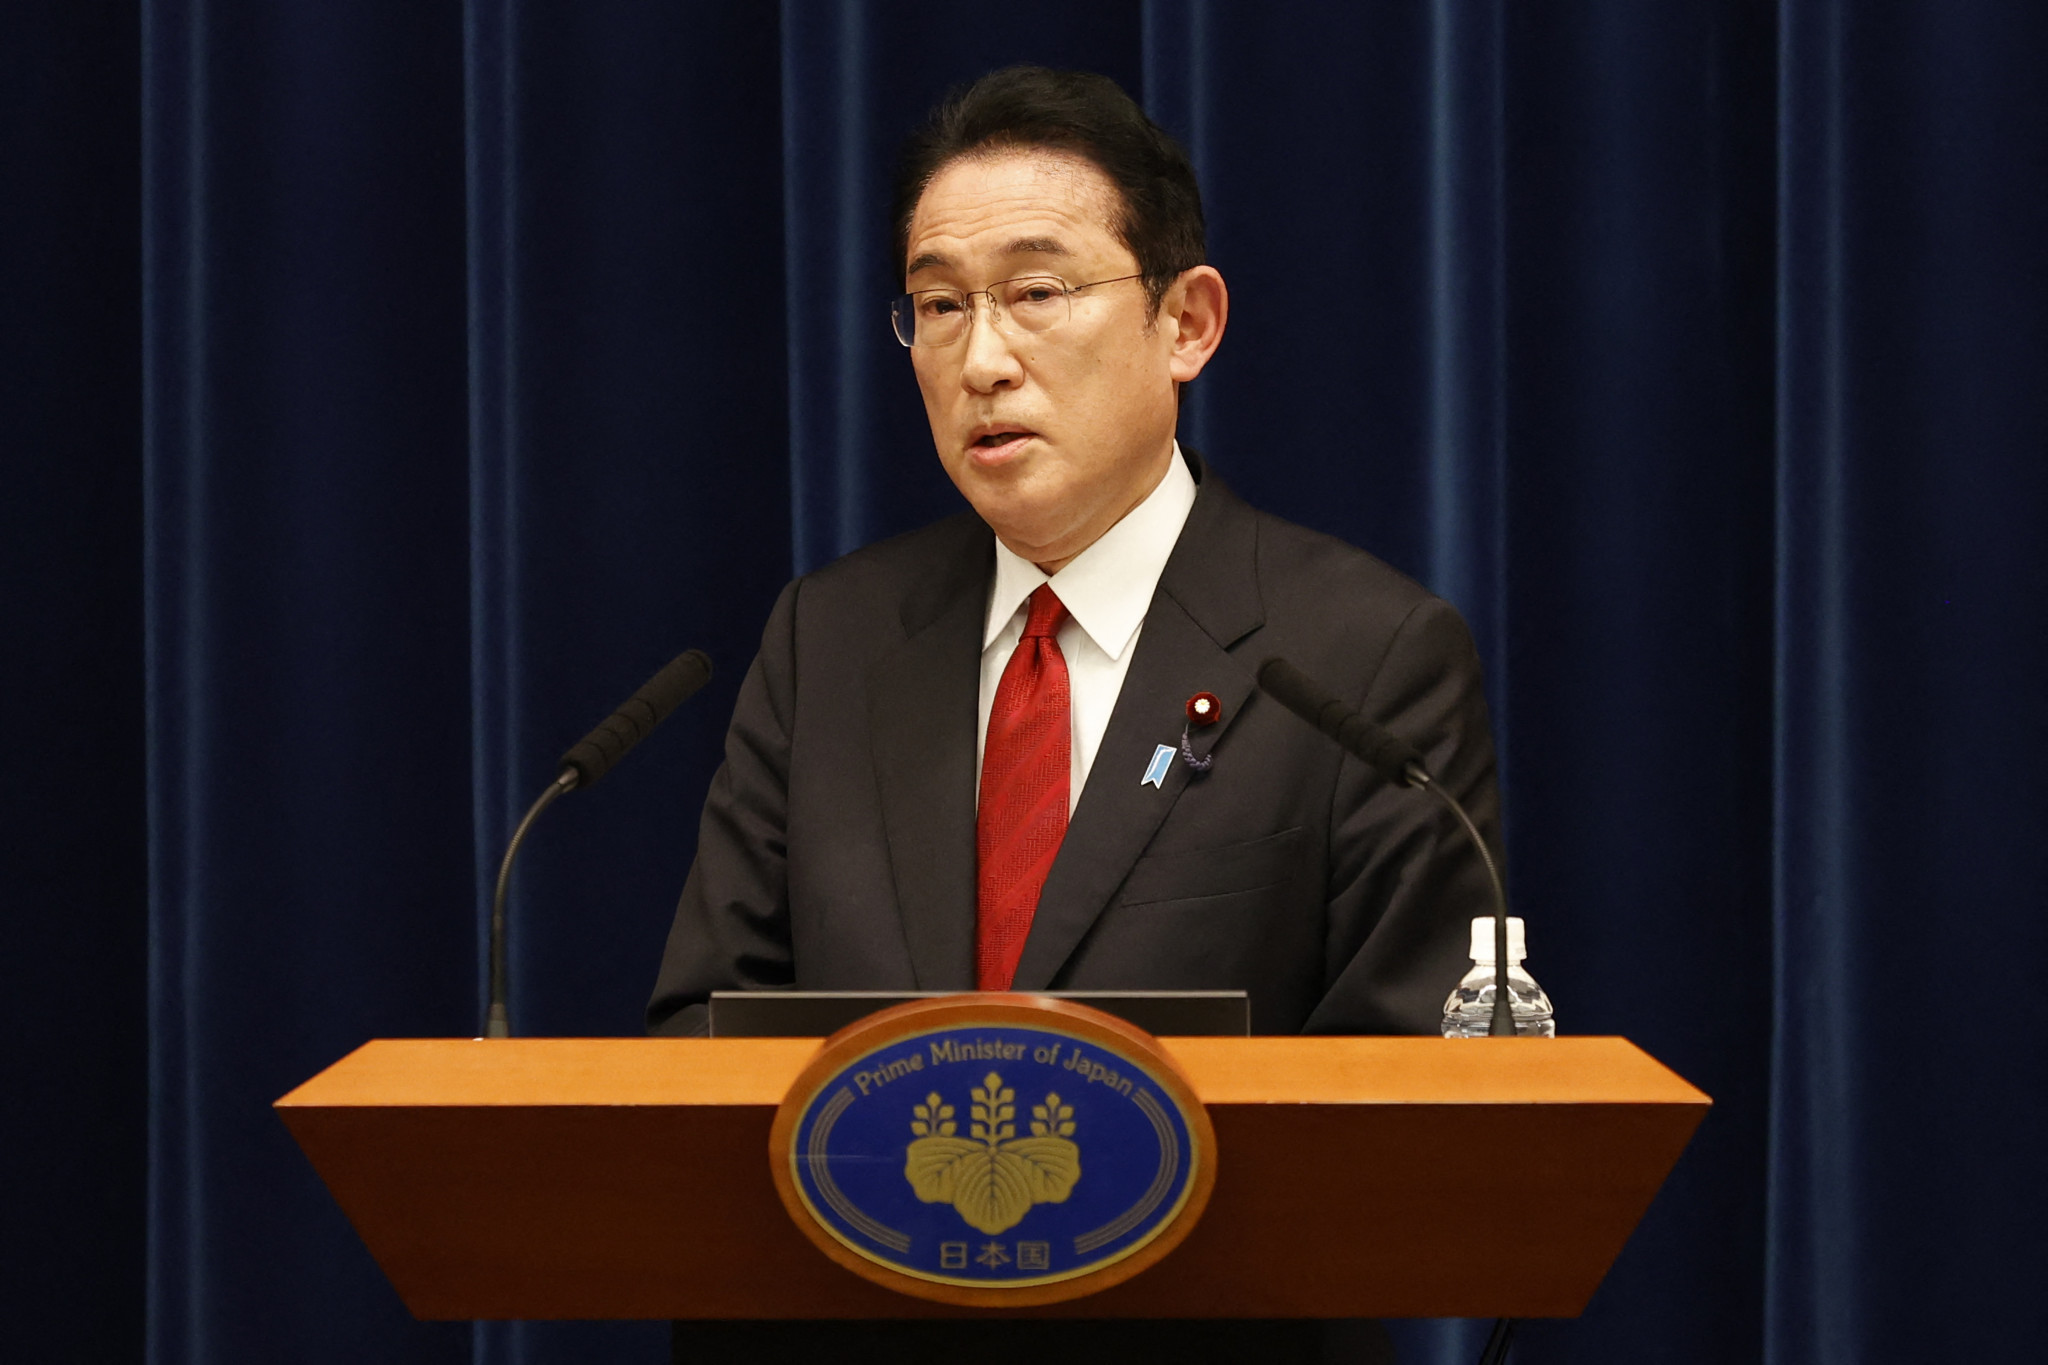 Japanese Prime Minister Fumio Kishida announced sanctions on Russia due to the invasion of Ukraine ©Getty Images